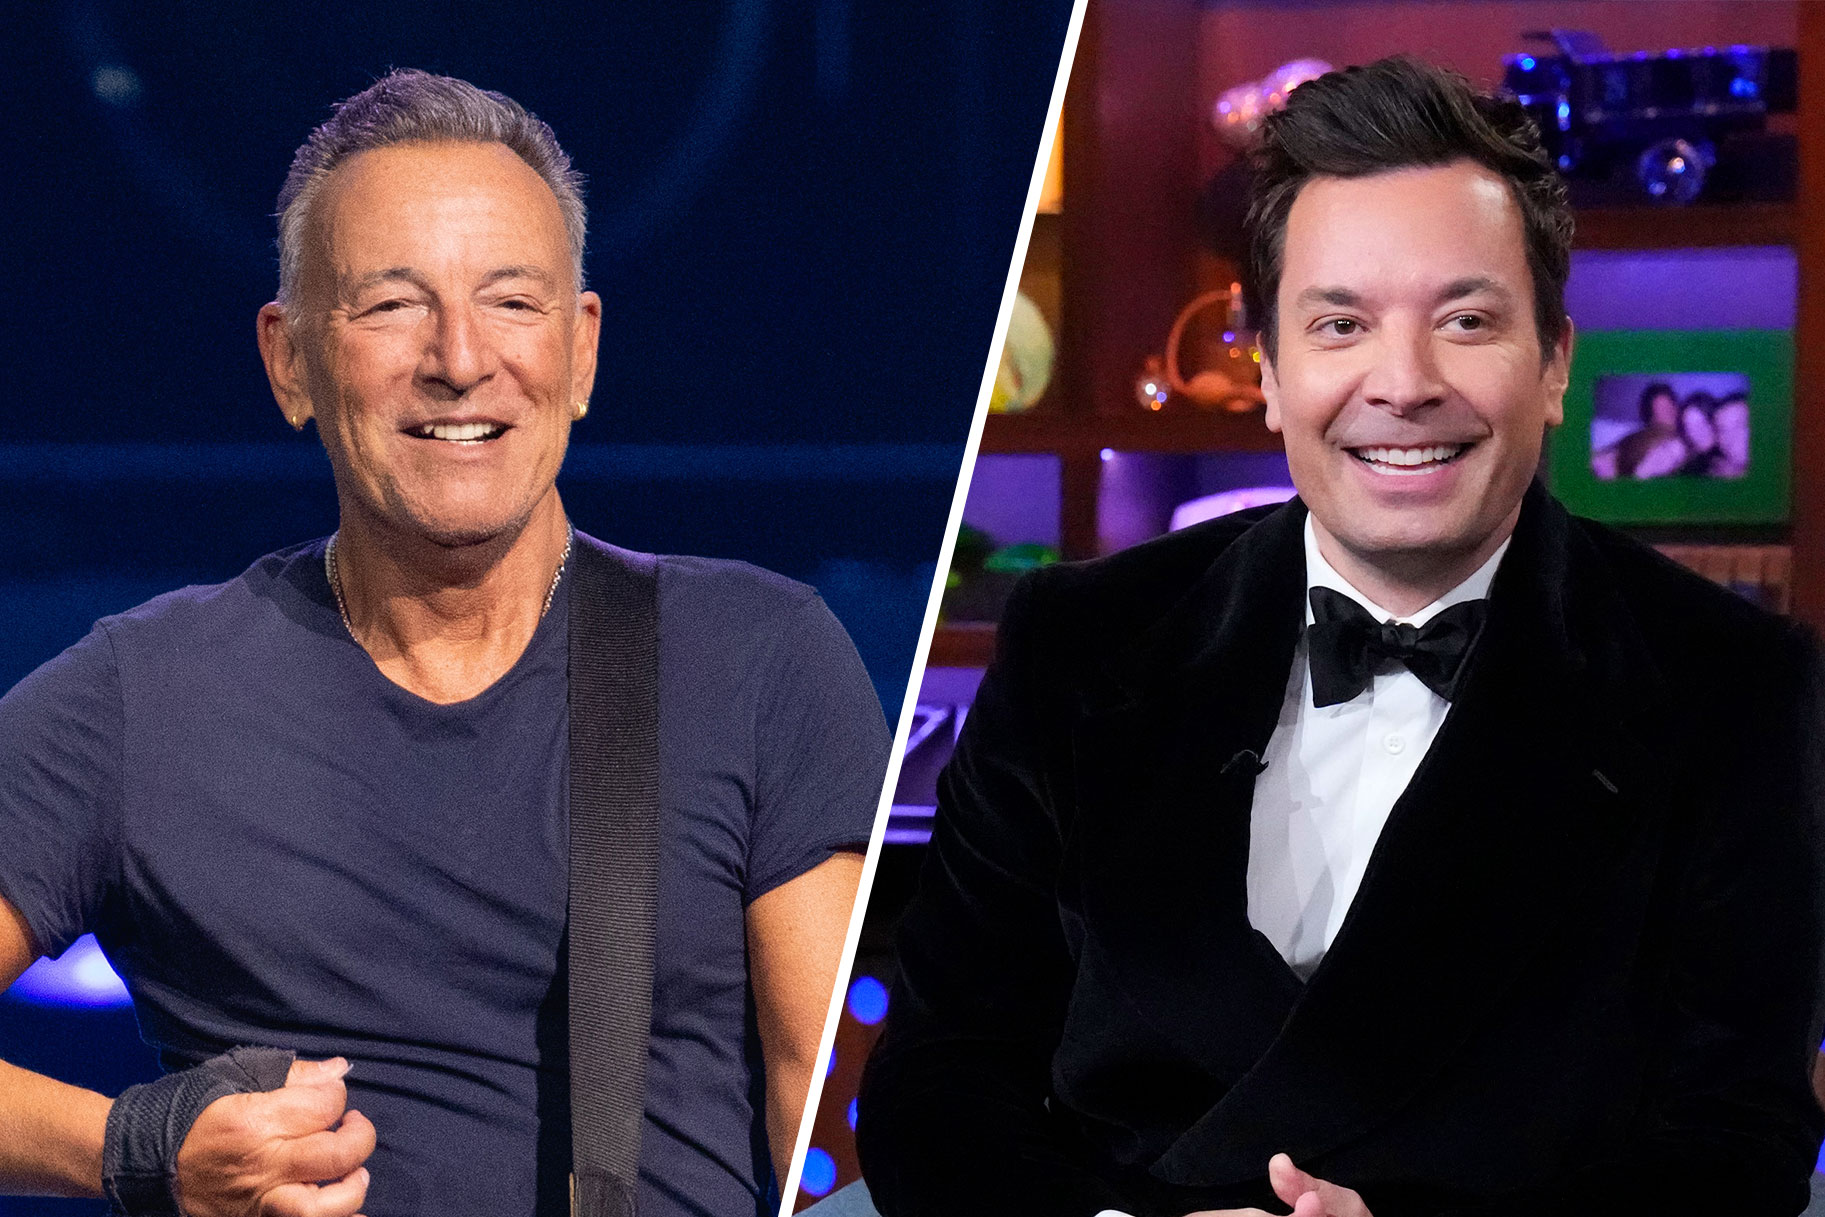 Split image of Jimmy Fallon and Bruce Springsteen